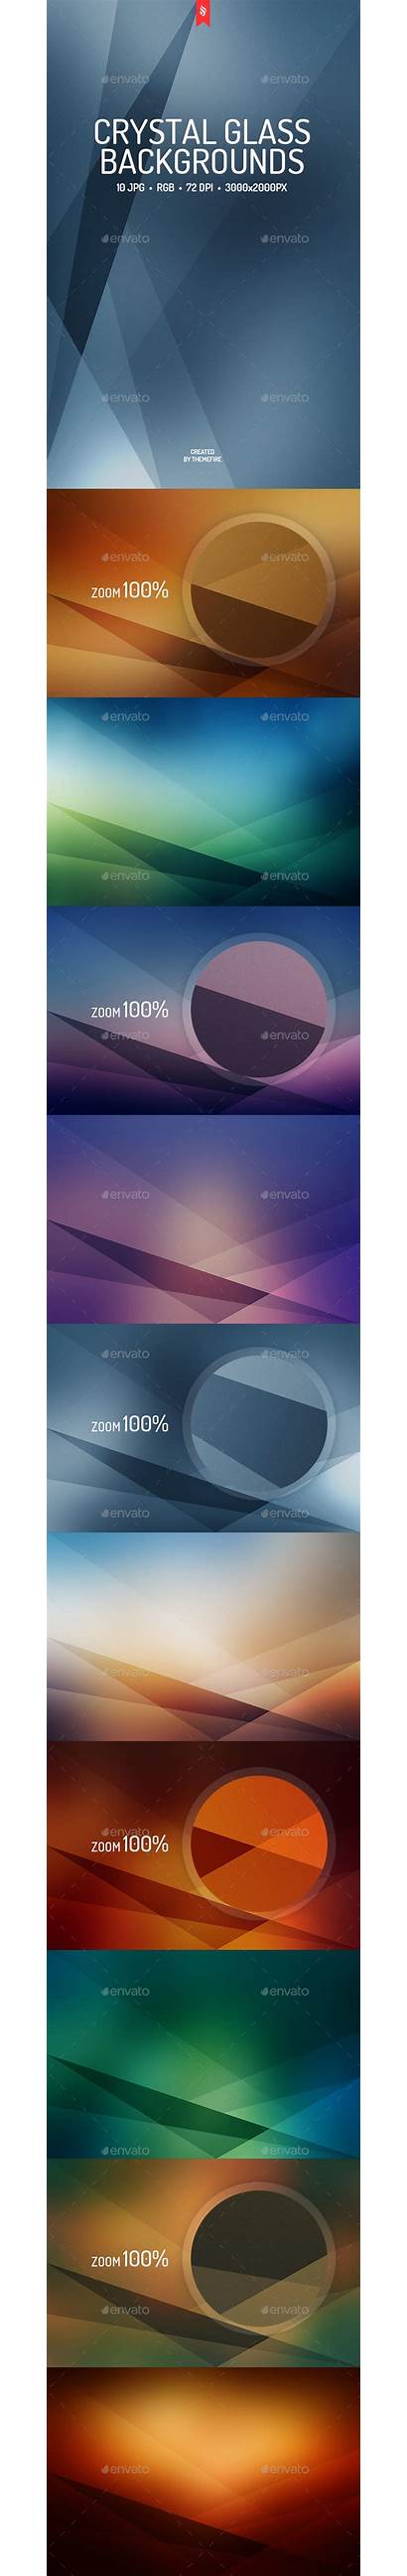 Graphicriver Crystal Glass Backgrounds